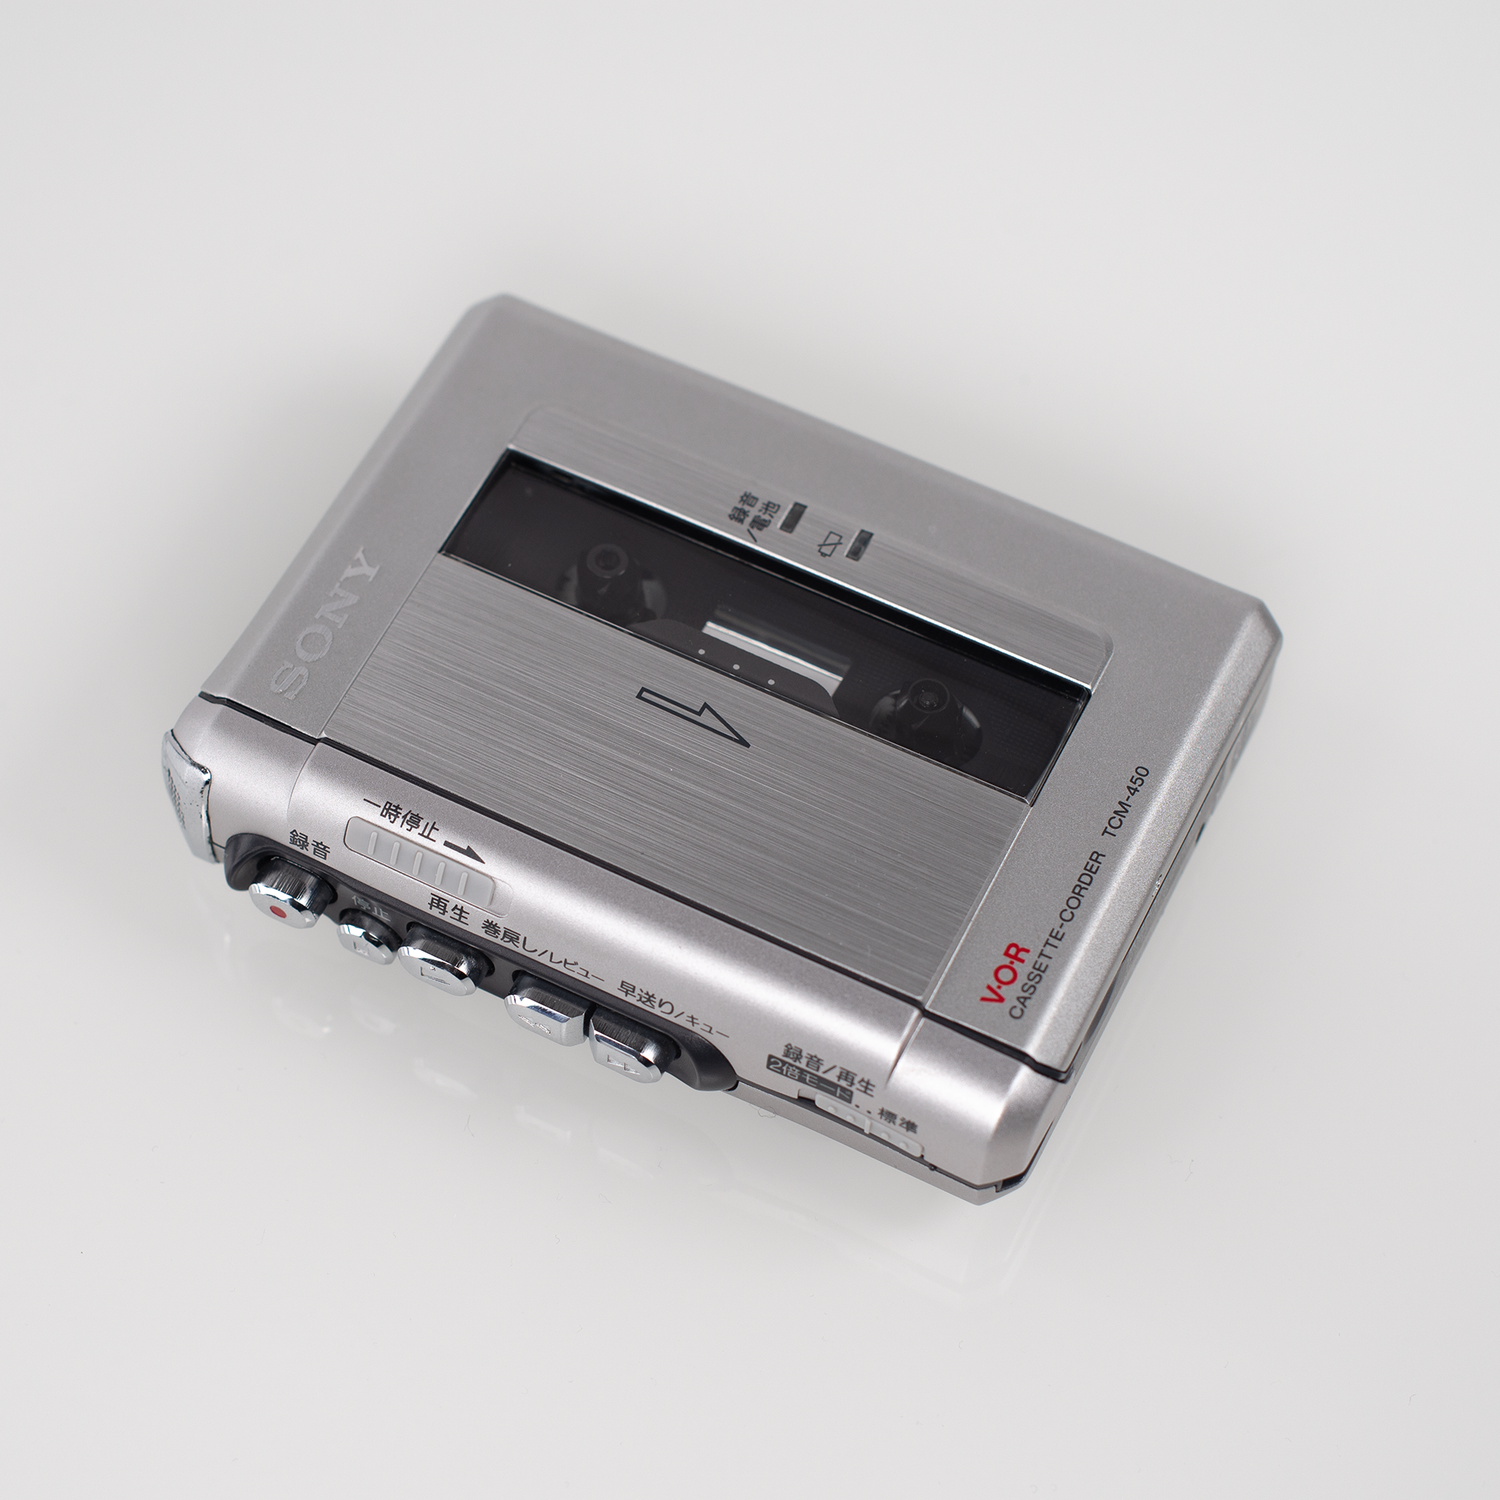 SONY CLEAR VOICE TCM-450 PORTABLE CASSETTE PLAYER & RECORDER